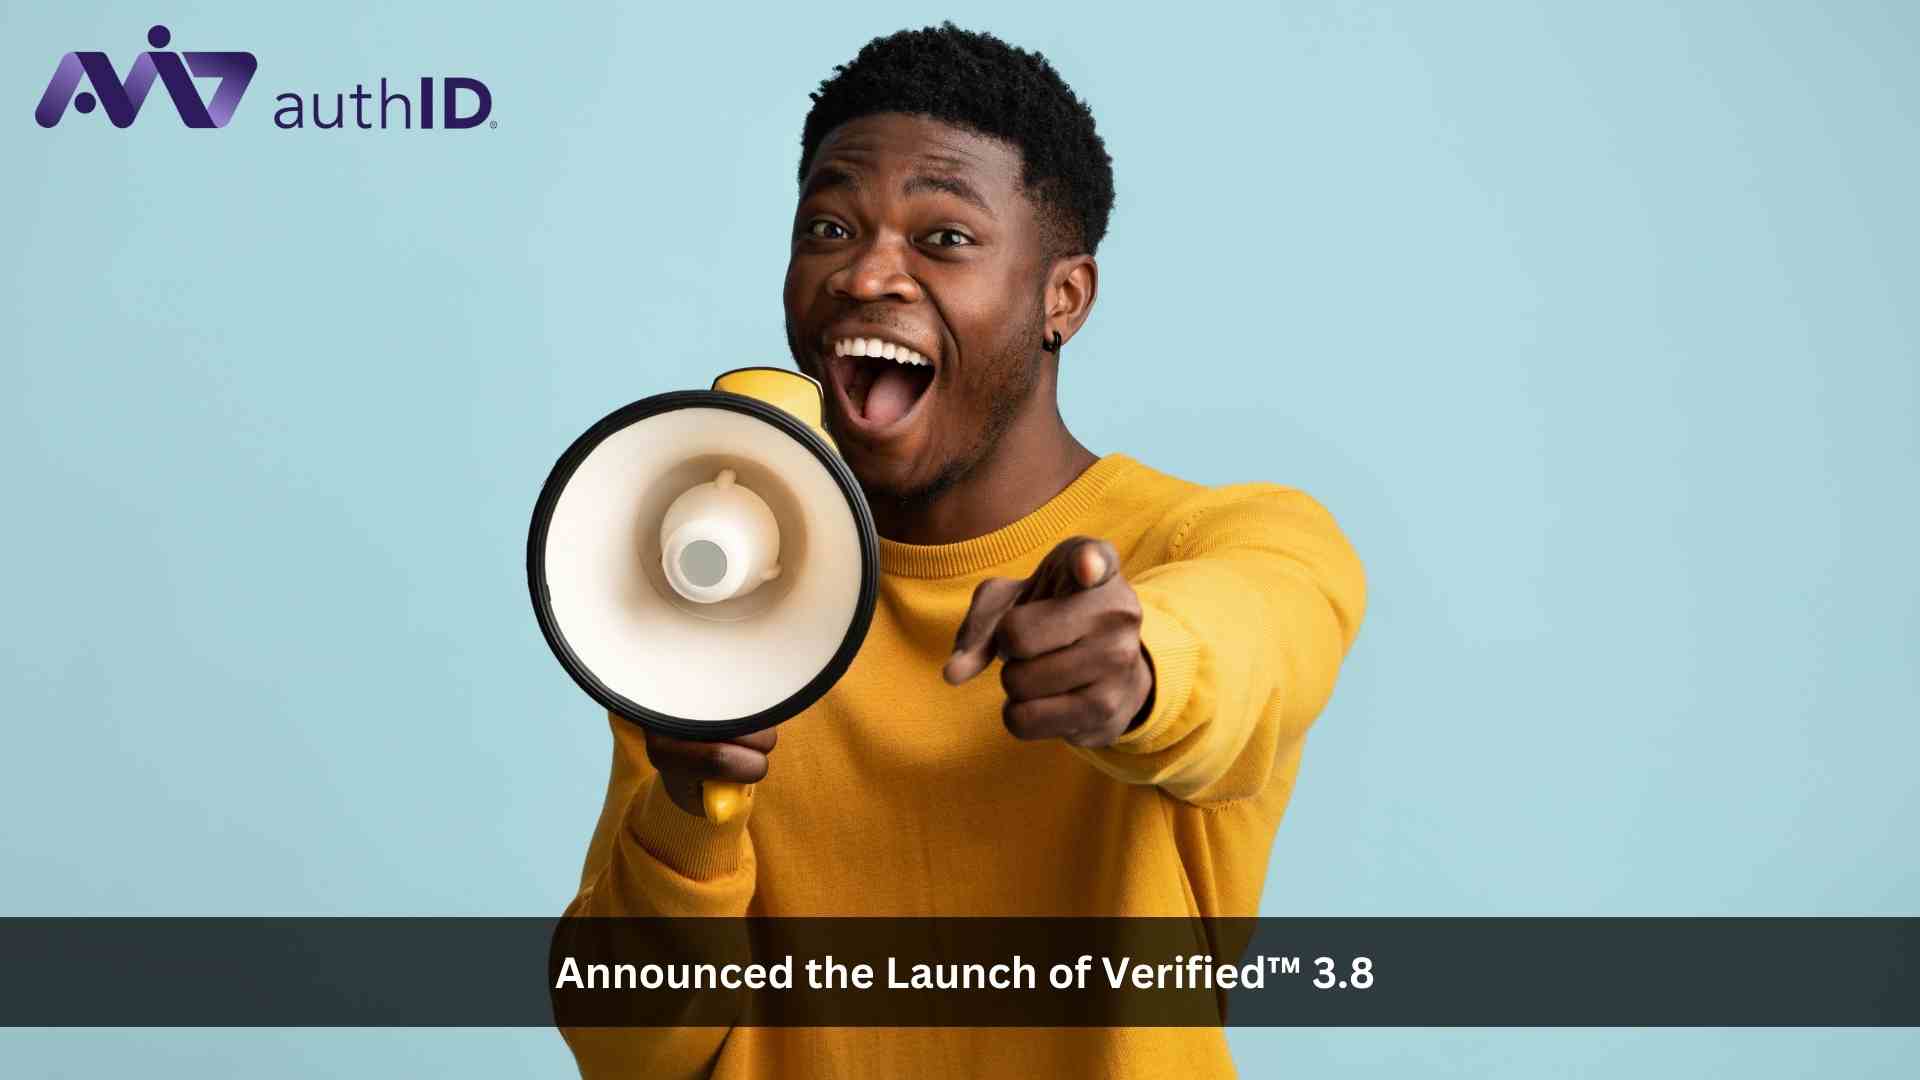 authID Continues to Innovate its Patented Identity Verification Platform with the Launch of Verified 3.8